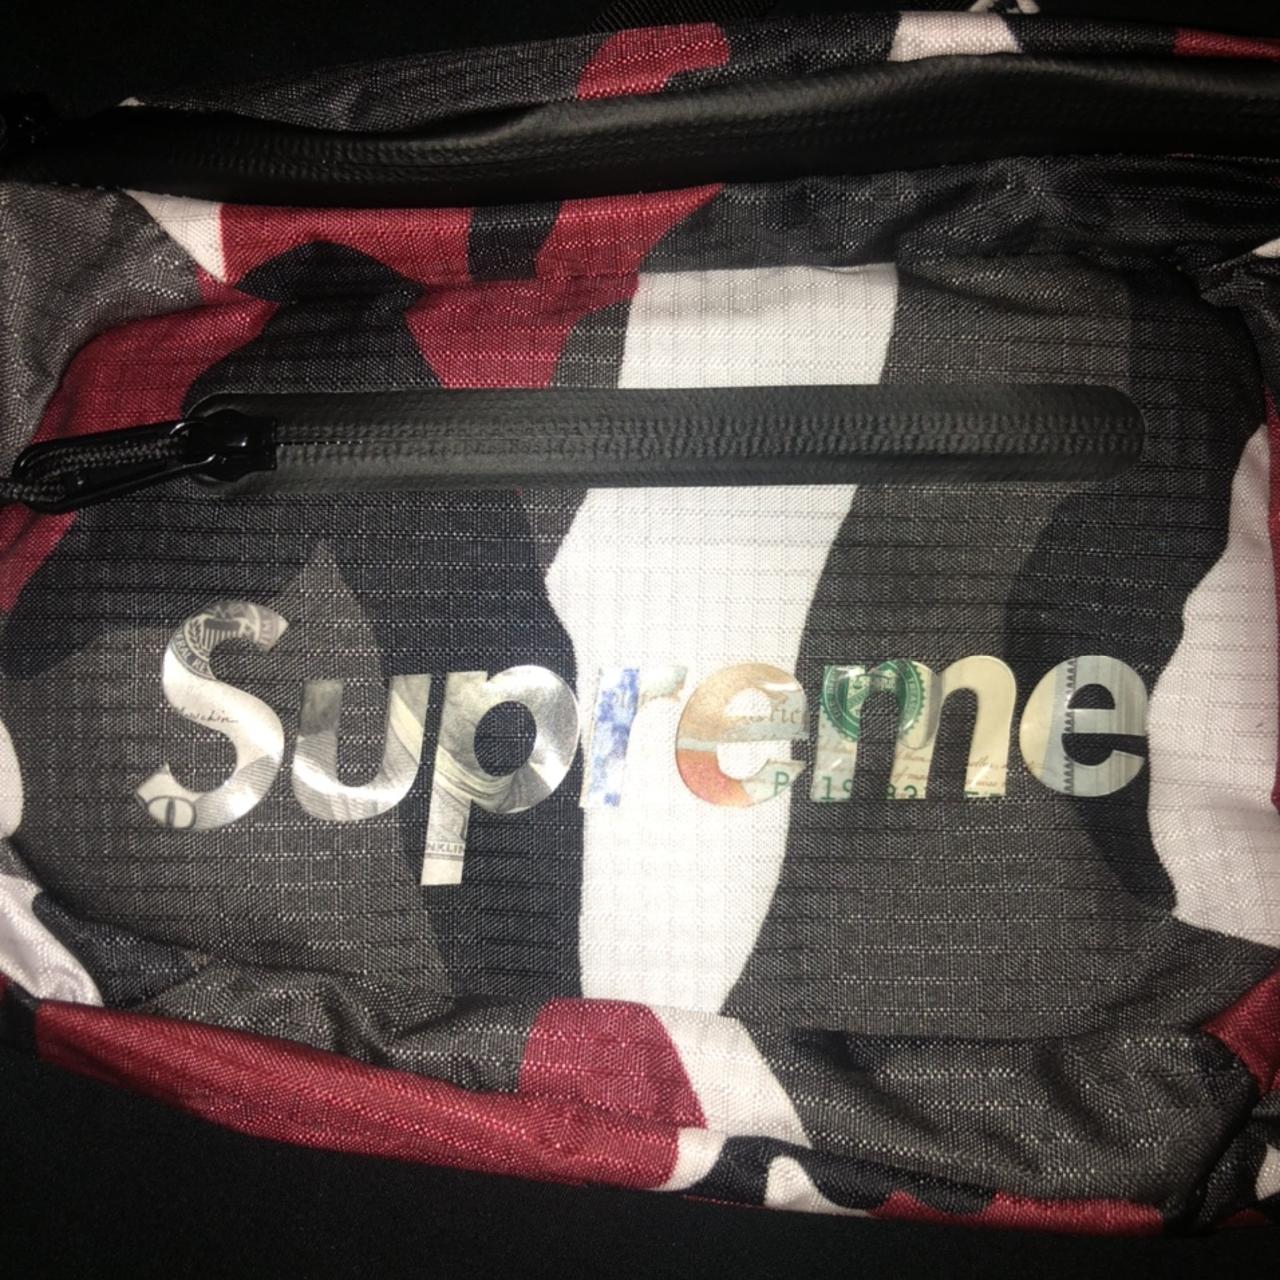 RED SUPREME SLING BAG BRAND NEW WITH TAGS FREE - Depop